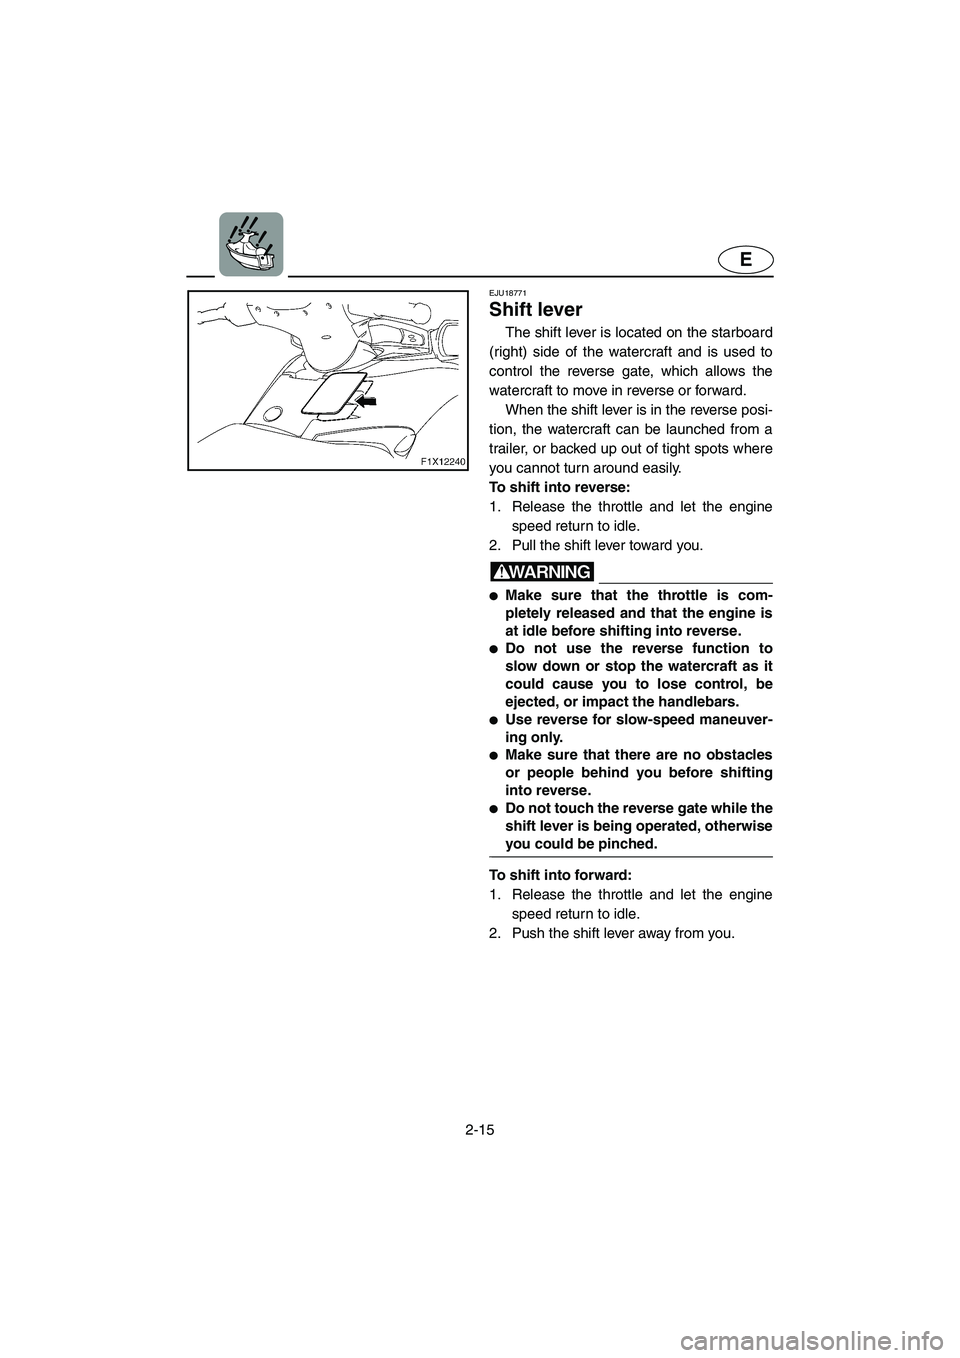 YAMAHA FX HO 2006 Service Manual 2-15
E
EJU18771 
Shift lever
The shift lever is located on the starboard
(right) side of the watercraft and is used to
control the reverse gate, which allows the
watercraft to move in reverse or forwa